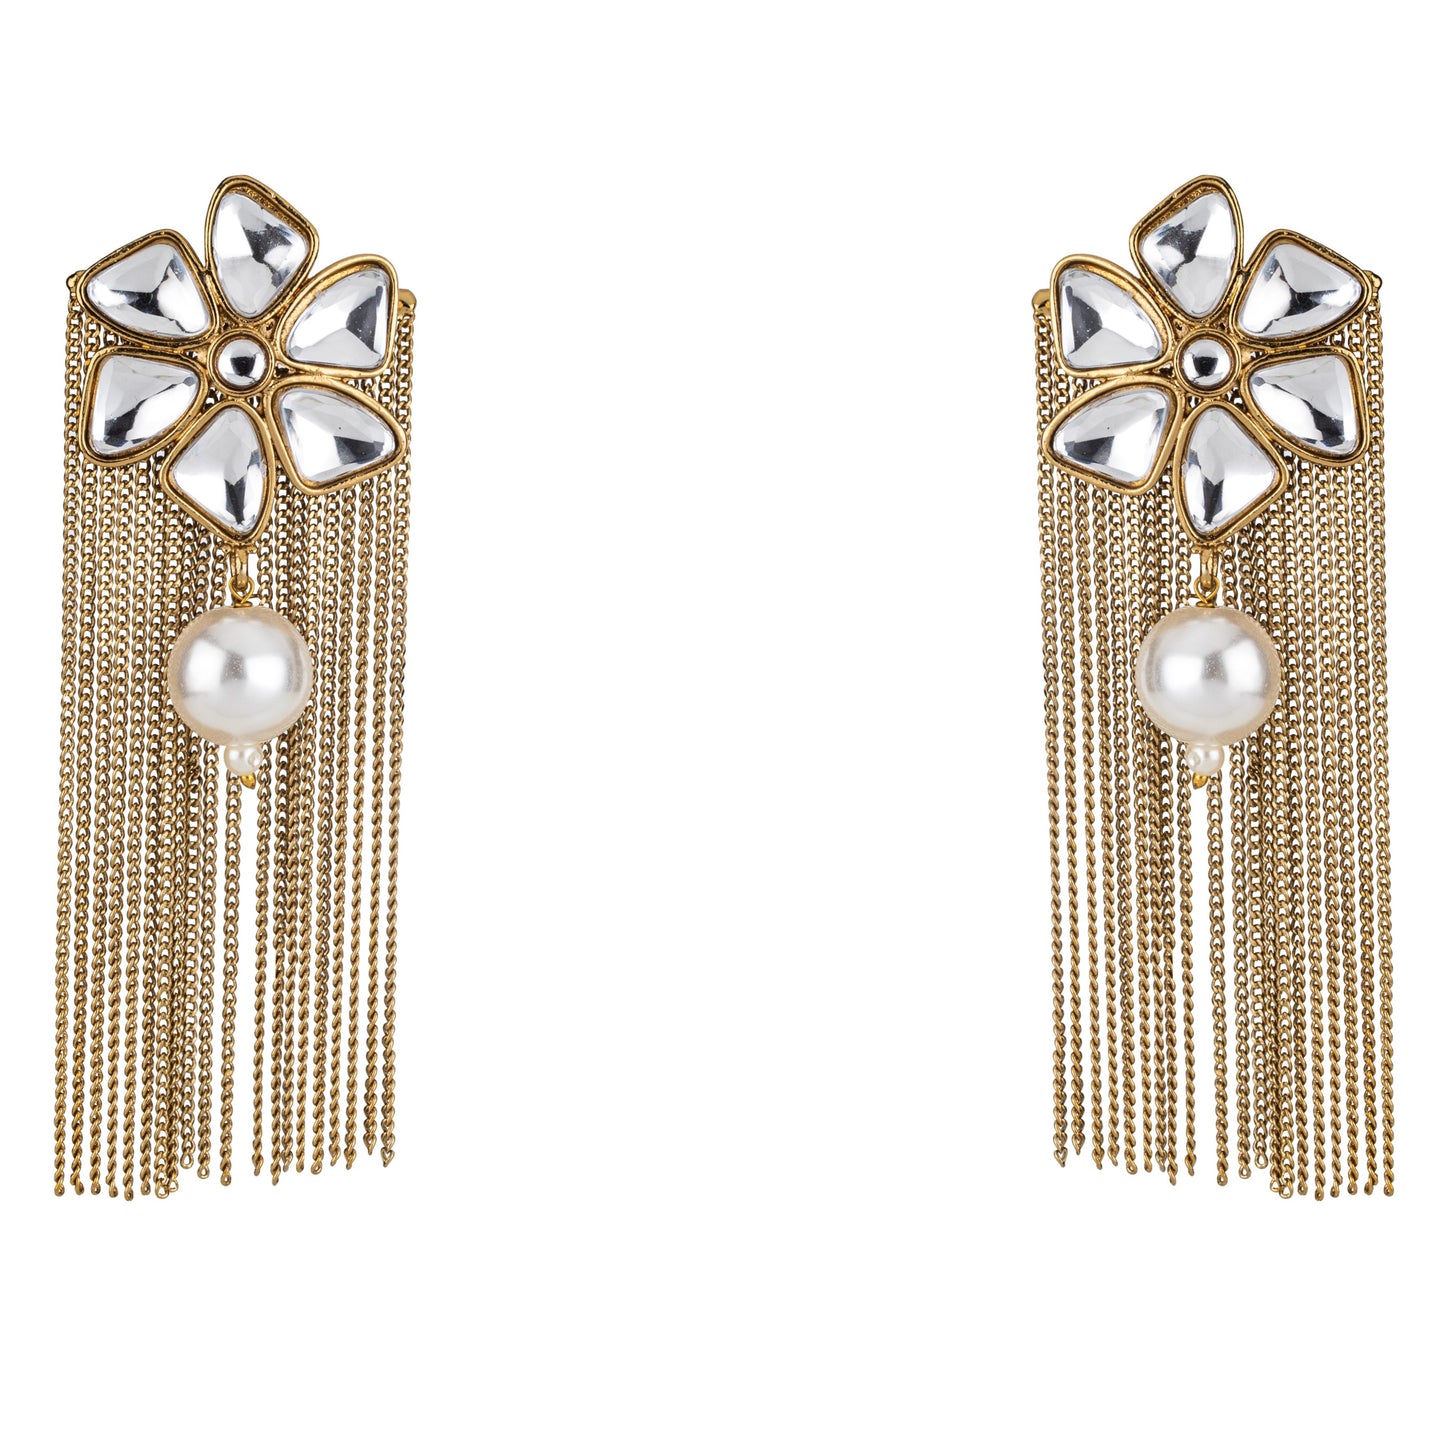 Bdiva 18K Gold Plated Floral Kundan Drop Pearl Earrings with Western Flair.